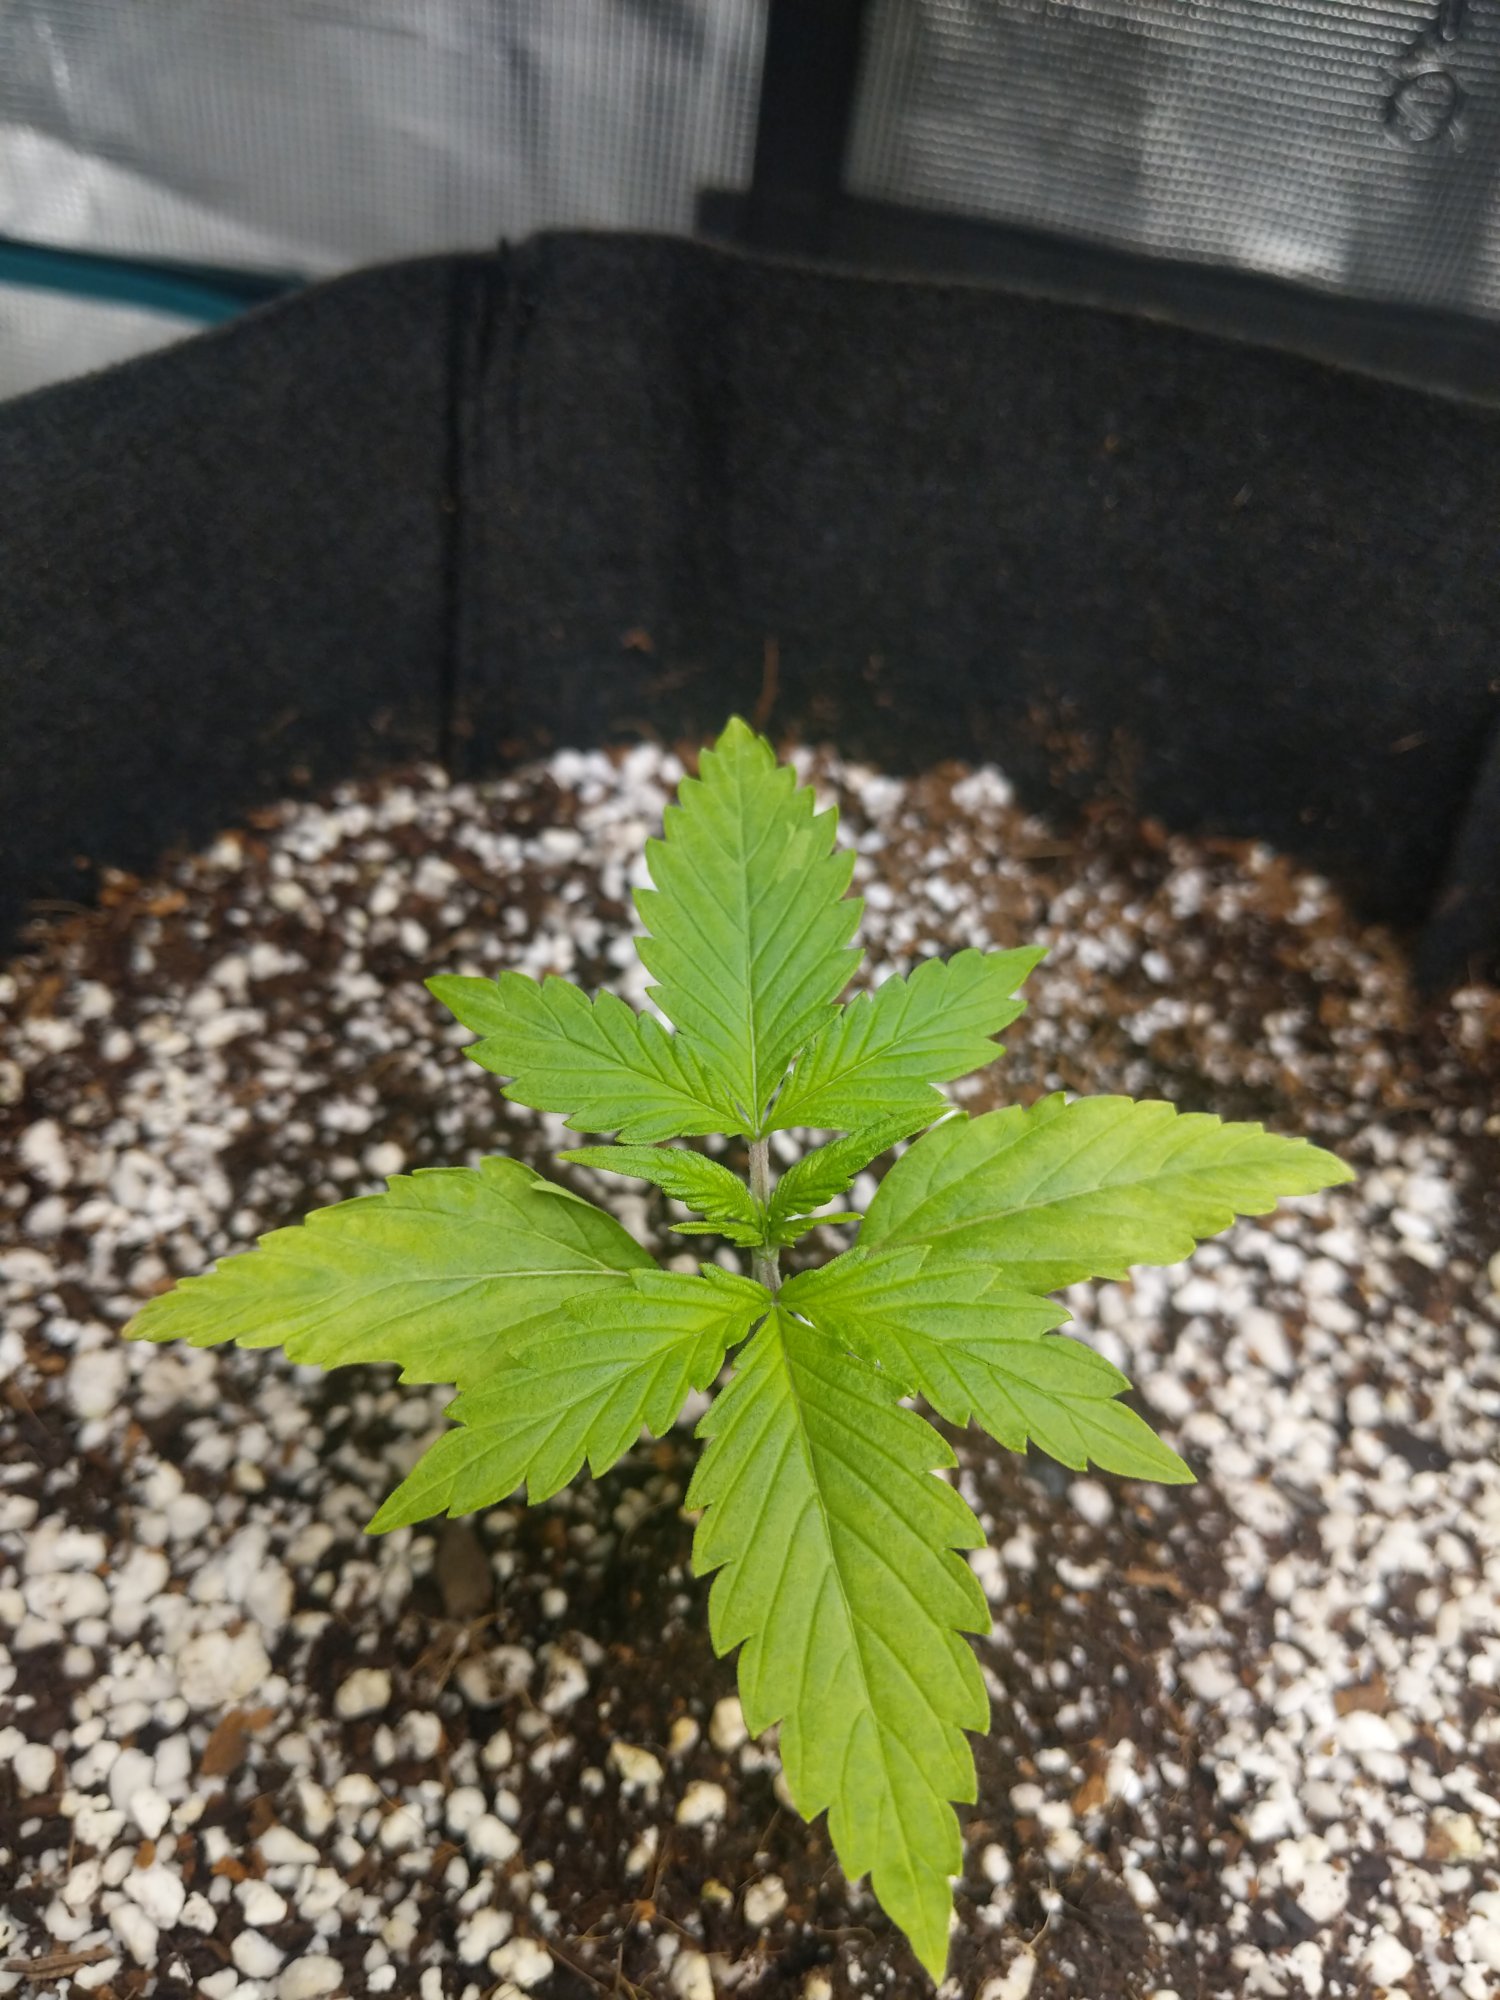 Do these 14 day auto flowers looks goodon track 4